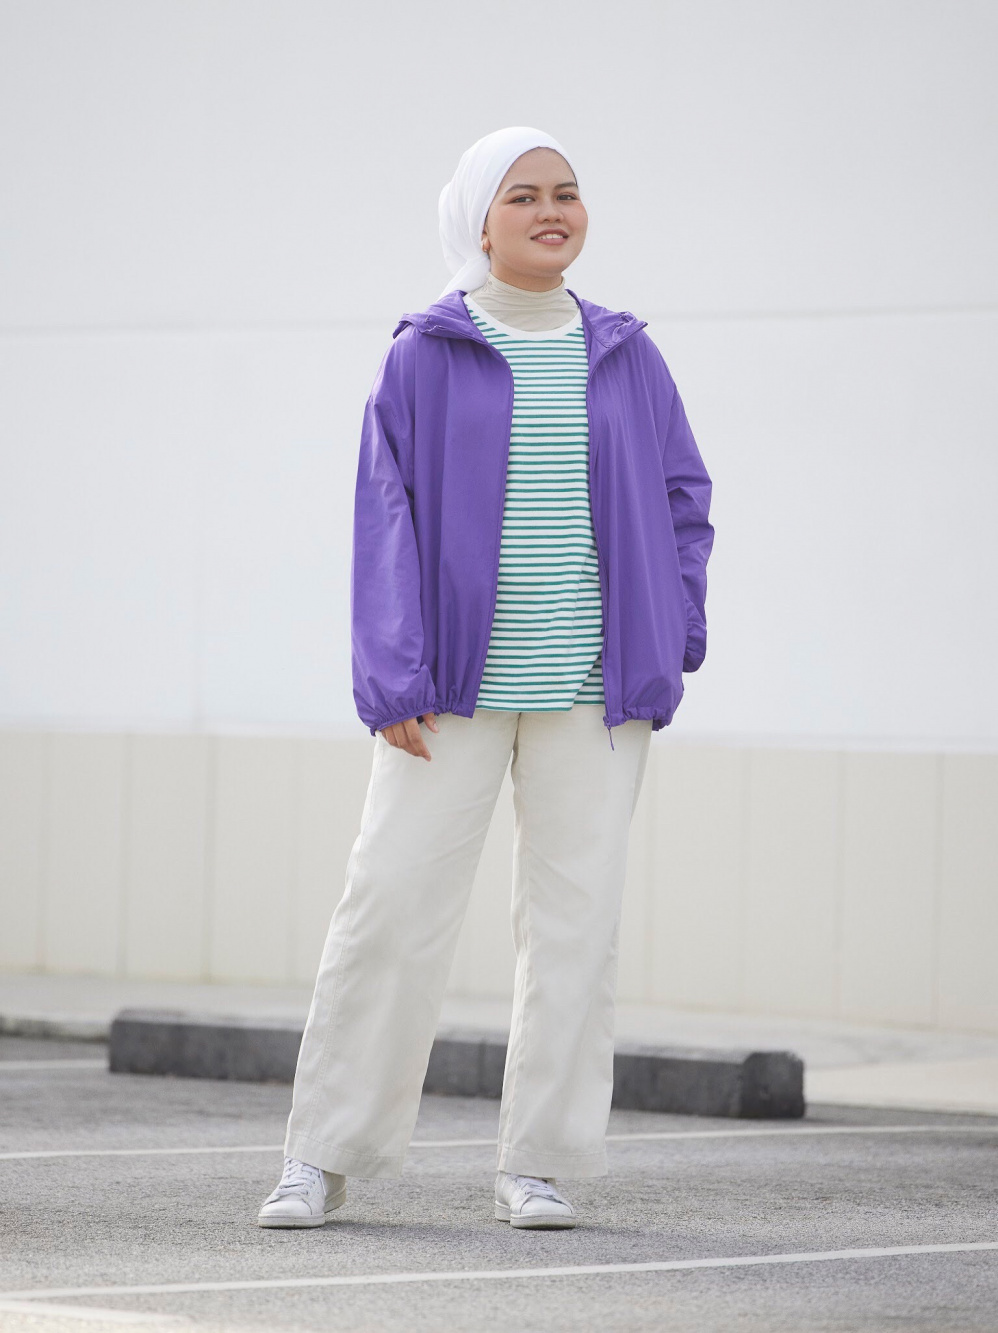 Check styling ideas for「Cotton Baggy Pants、Mini Shoulder Bag」| UNIQLO PH